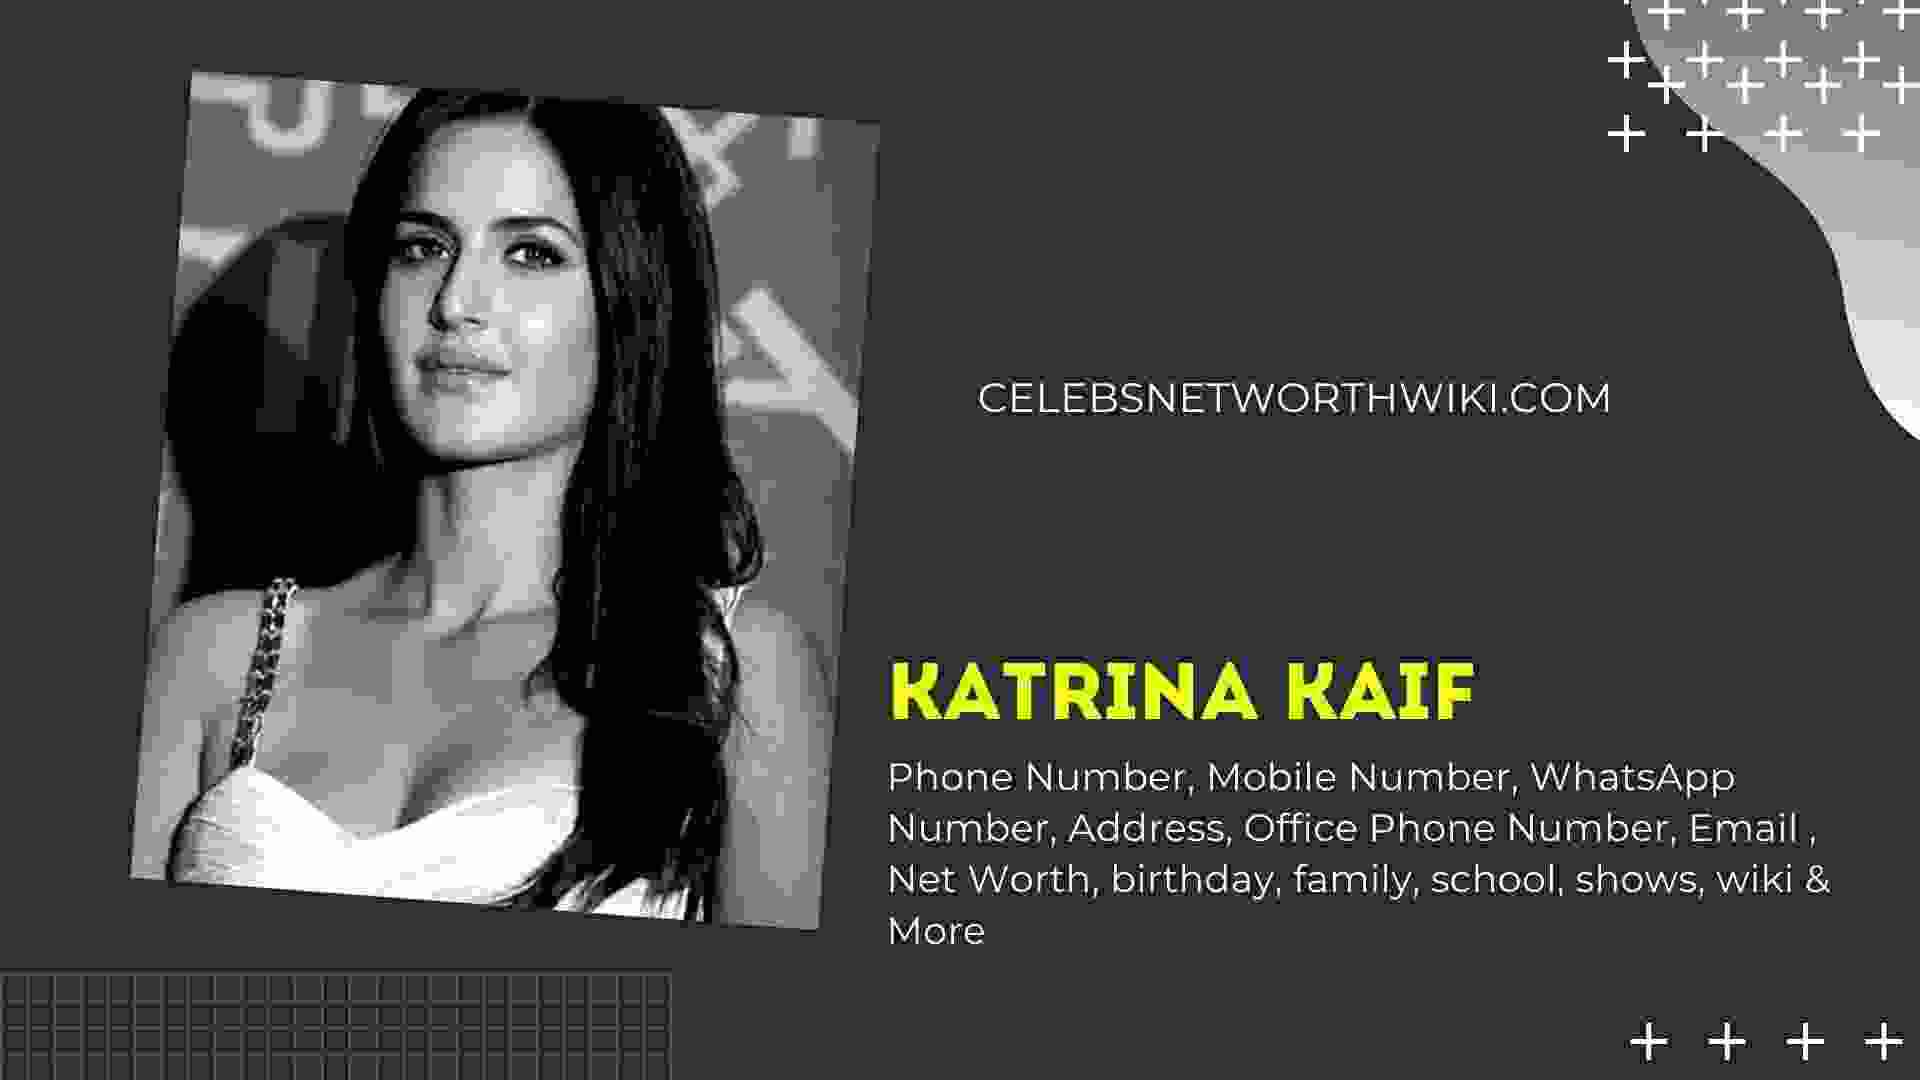 Katrina Kaif Phone Number Whatsapp Number Contact Number Office Phone Number Celebs Networth Wiki You were redirected here from the unofficial page: katrina kaif phone number whatsapp